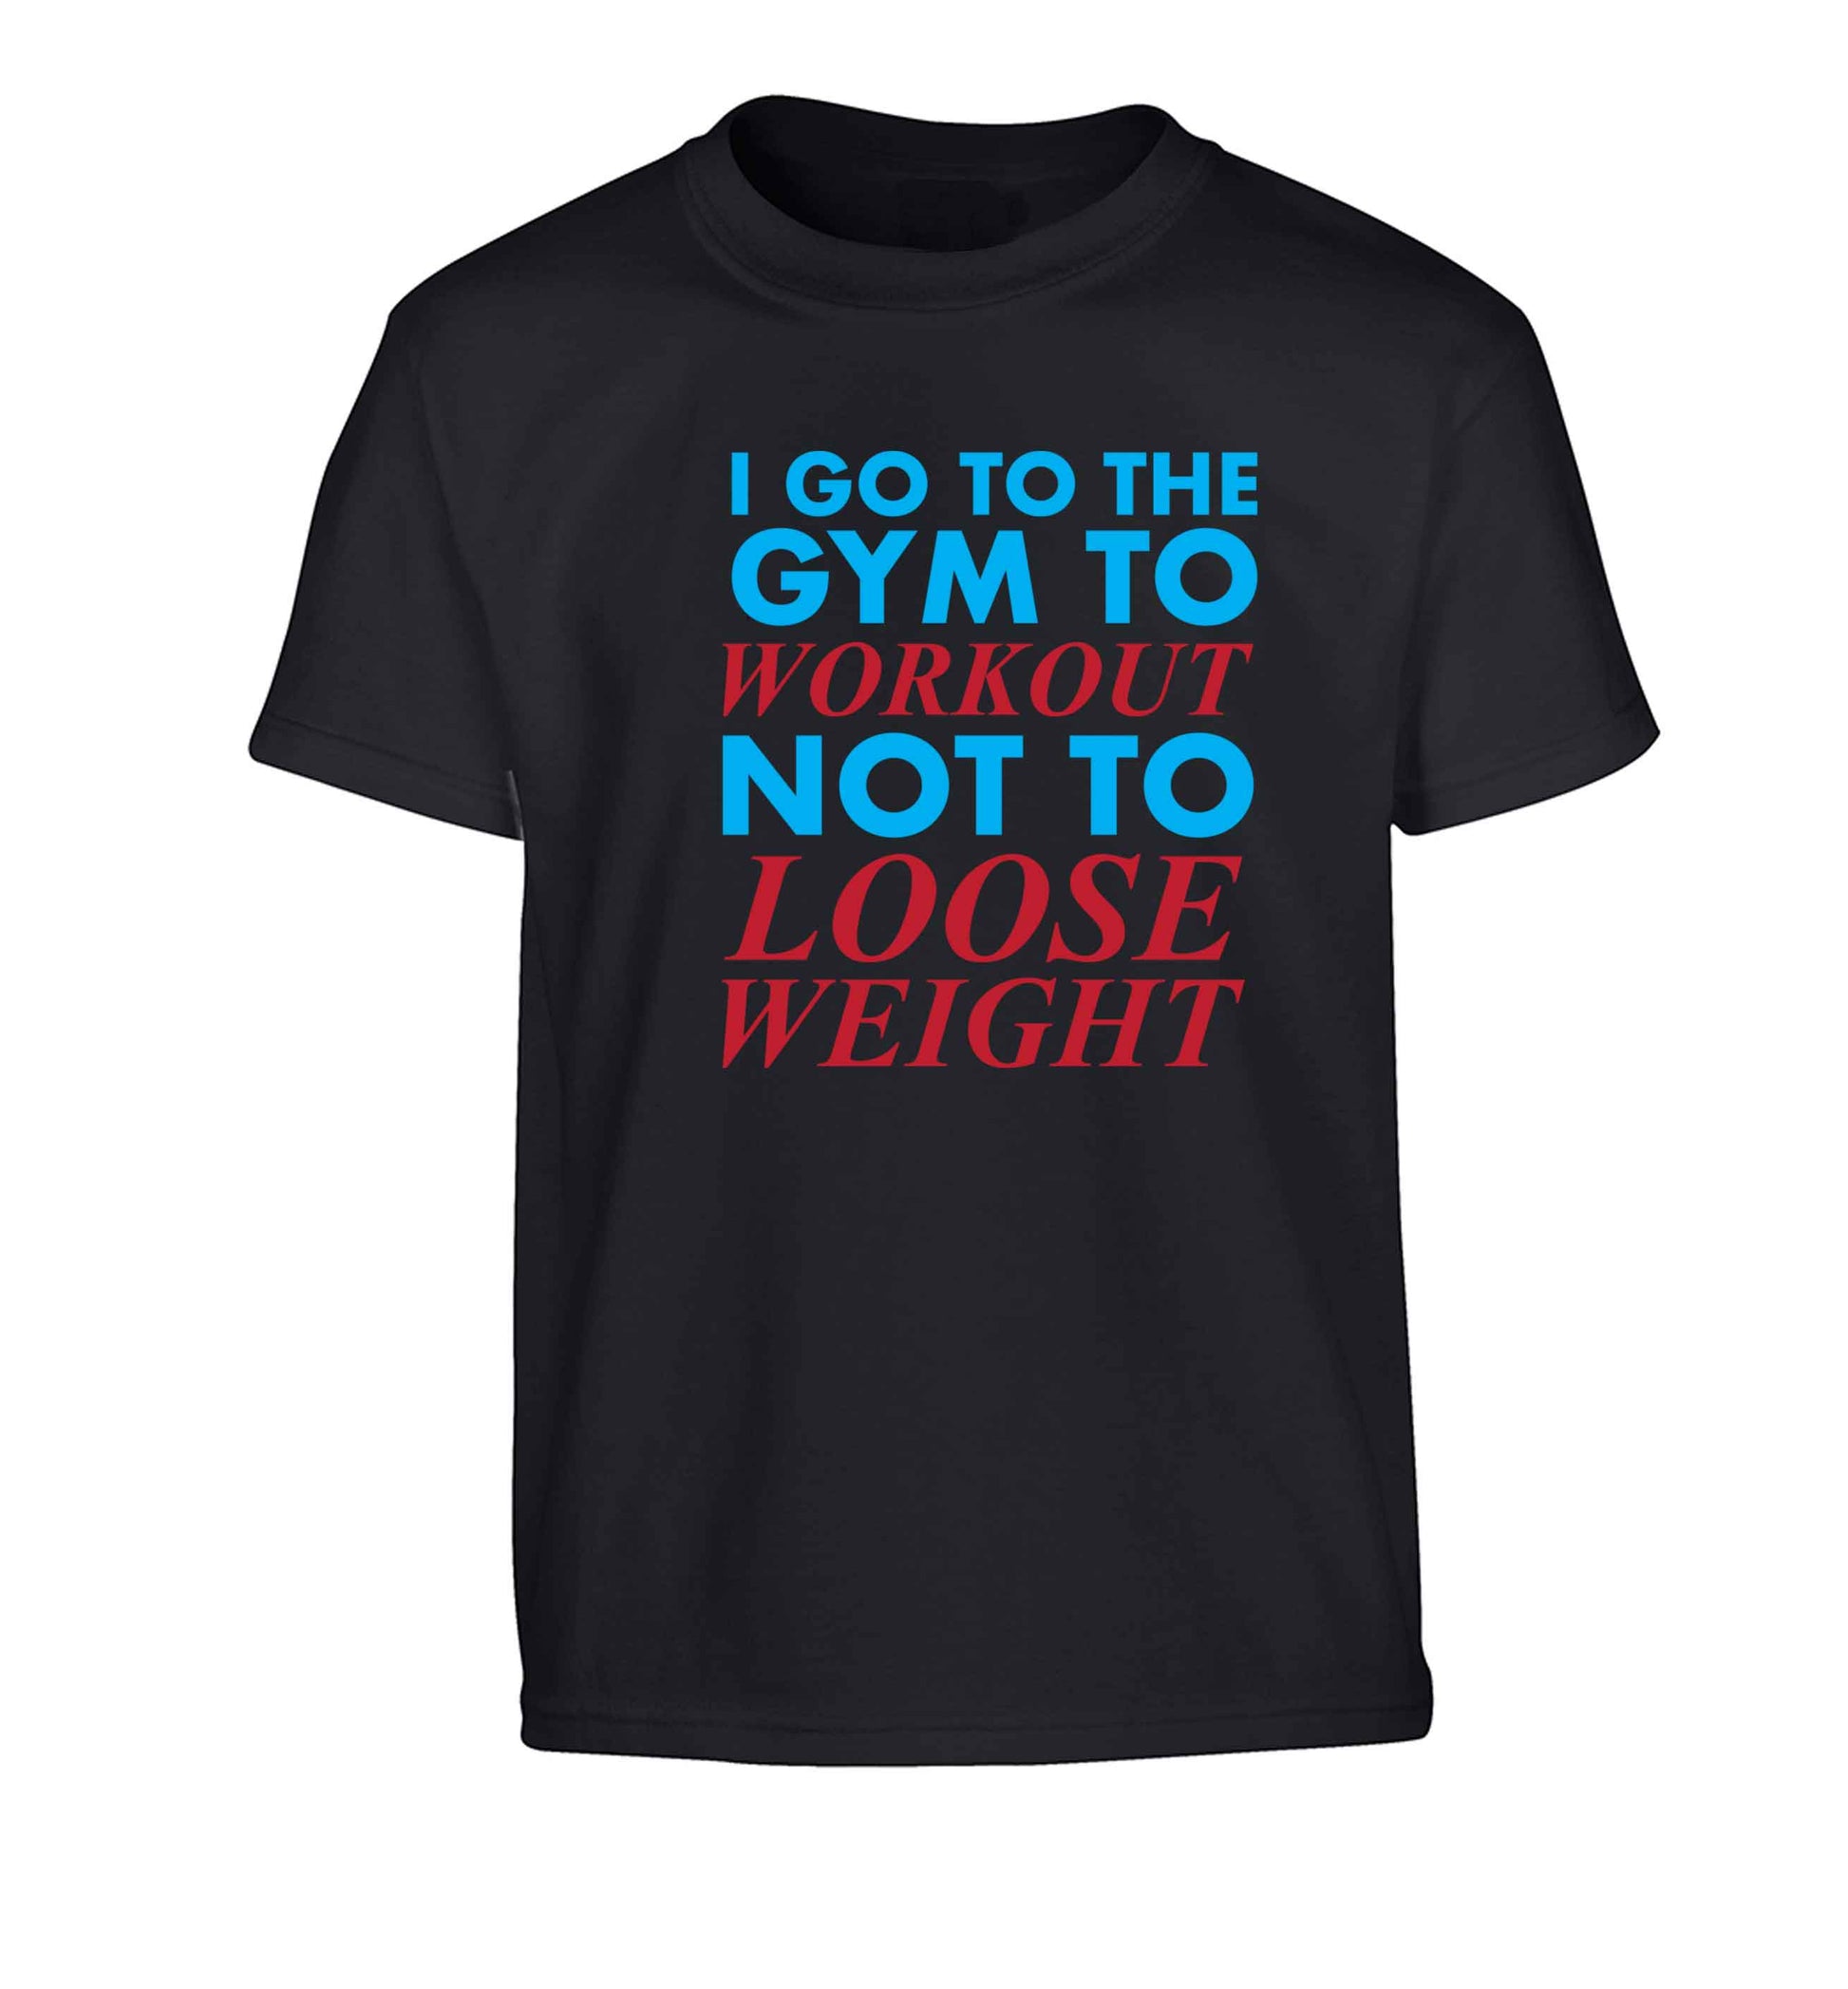 I go to the gym to workout not to loose weight Children's black Tshirt 12-13 Years